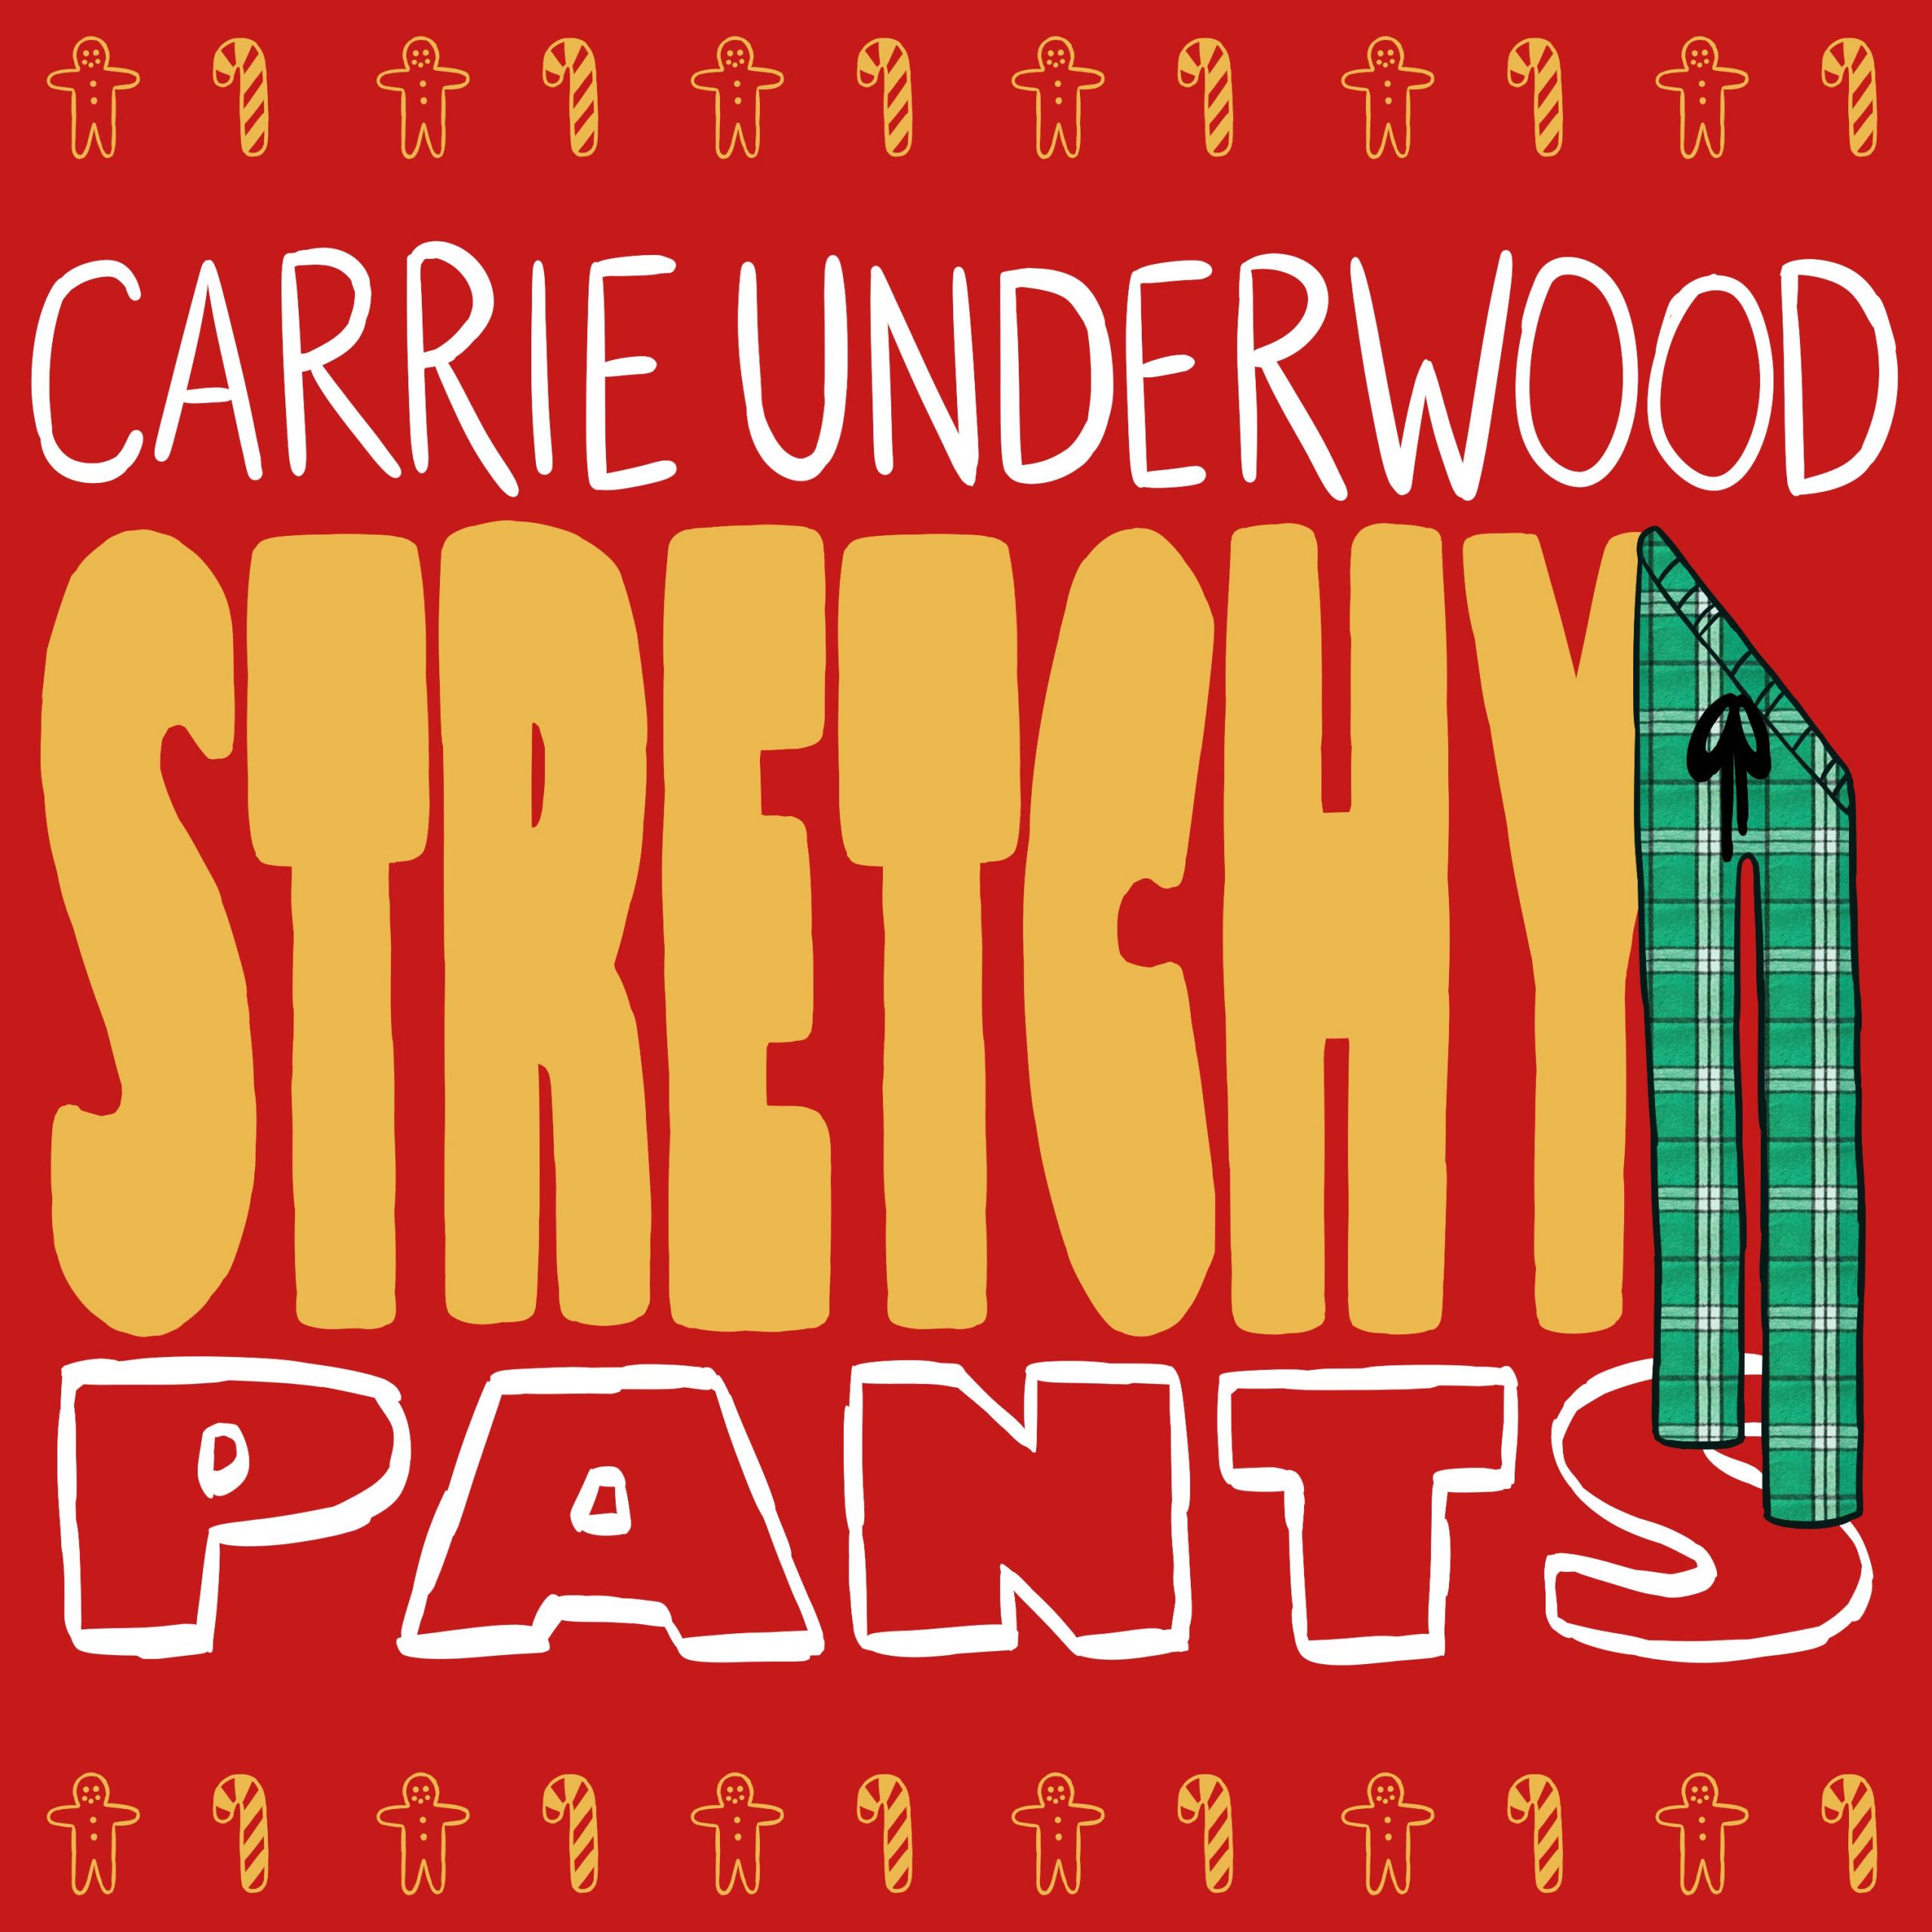 https://www.stretchypantssong.com/files/2021/11/stretchypants_albumcover-1-compressed-scaled.jpg